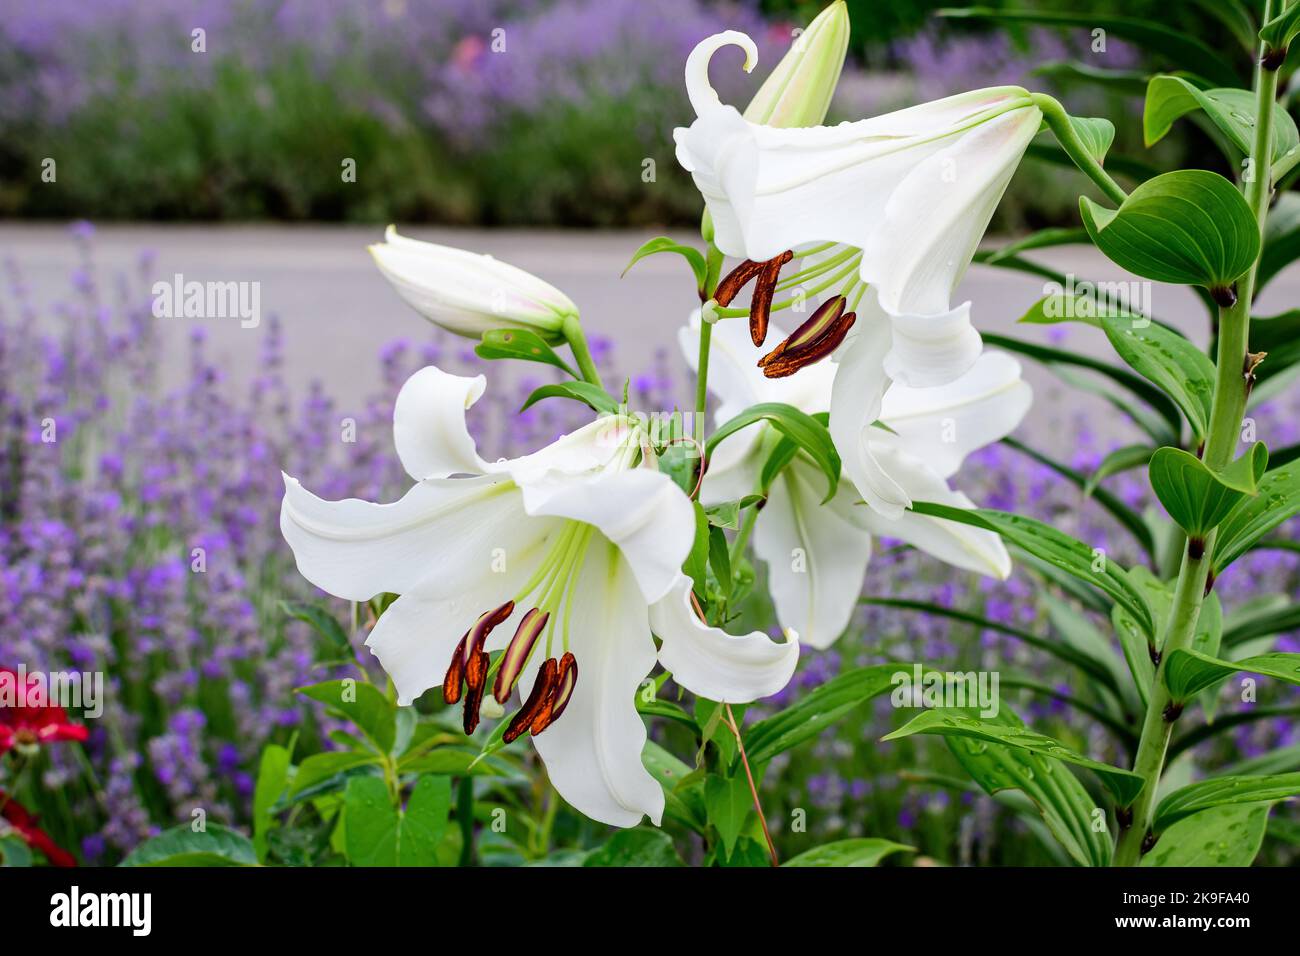 Group of many large white flowers and buds of Lilium or Lily plant in a British cottage style garden in a sunny summer day, beautiful outdoor floral b Stock Photo